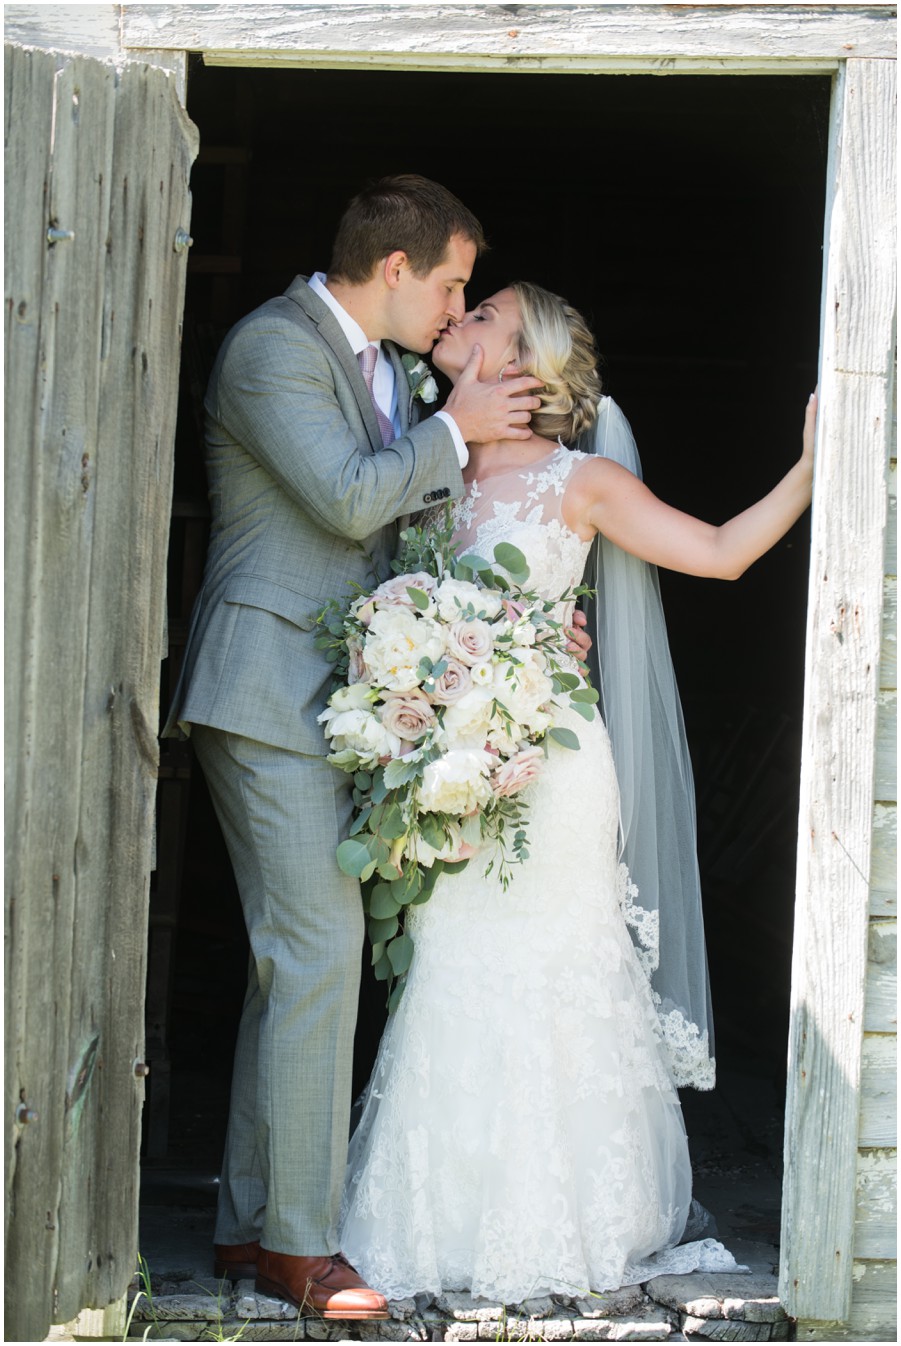 Wedding couple poses in barn doorway at The Oaks by Melissa Grimes-Guy Photography